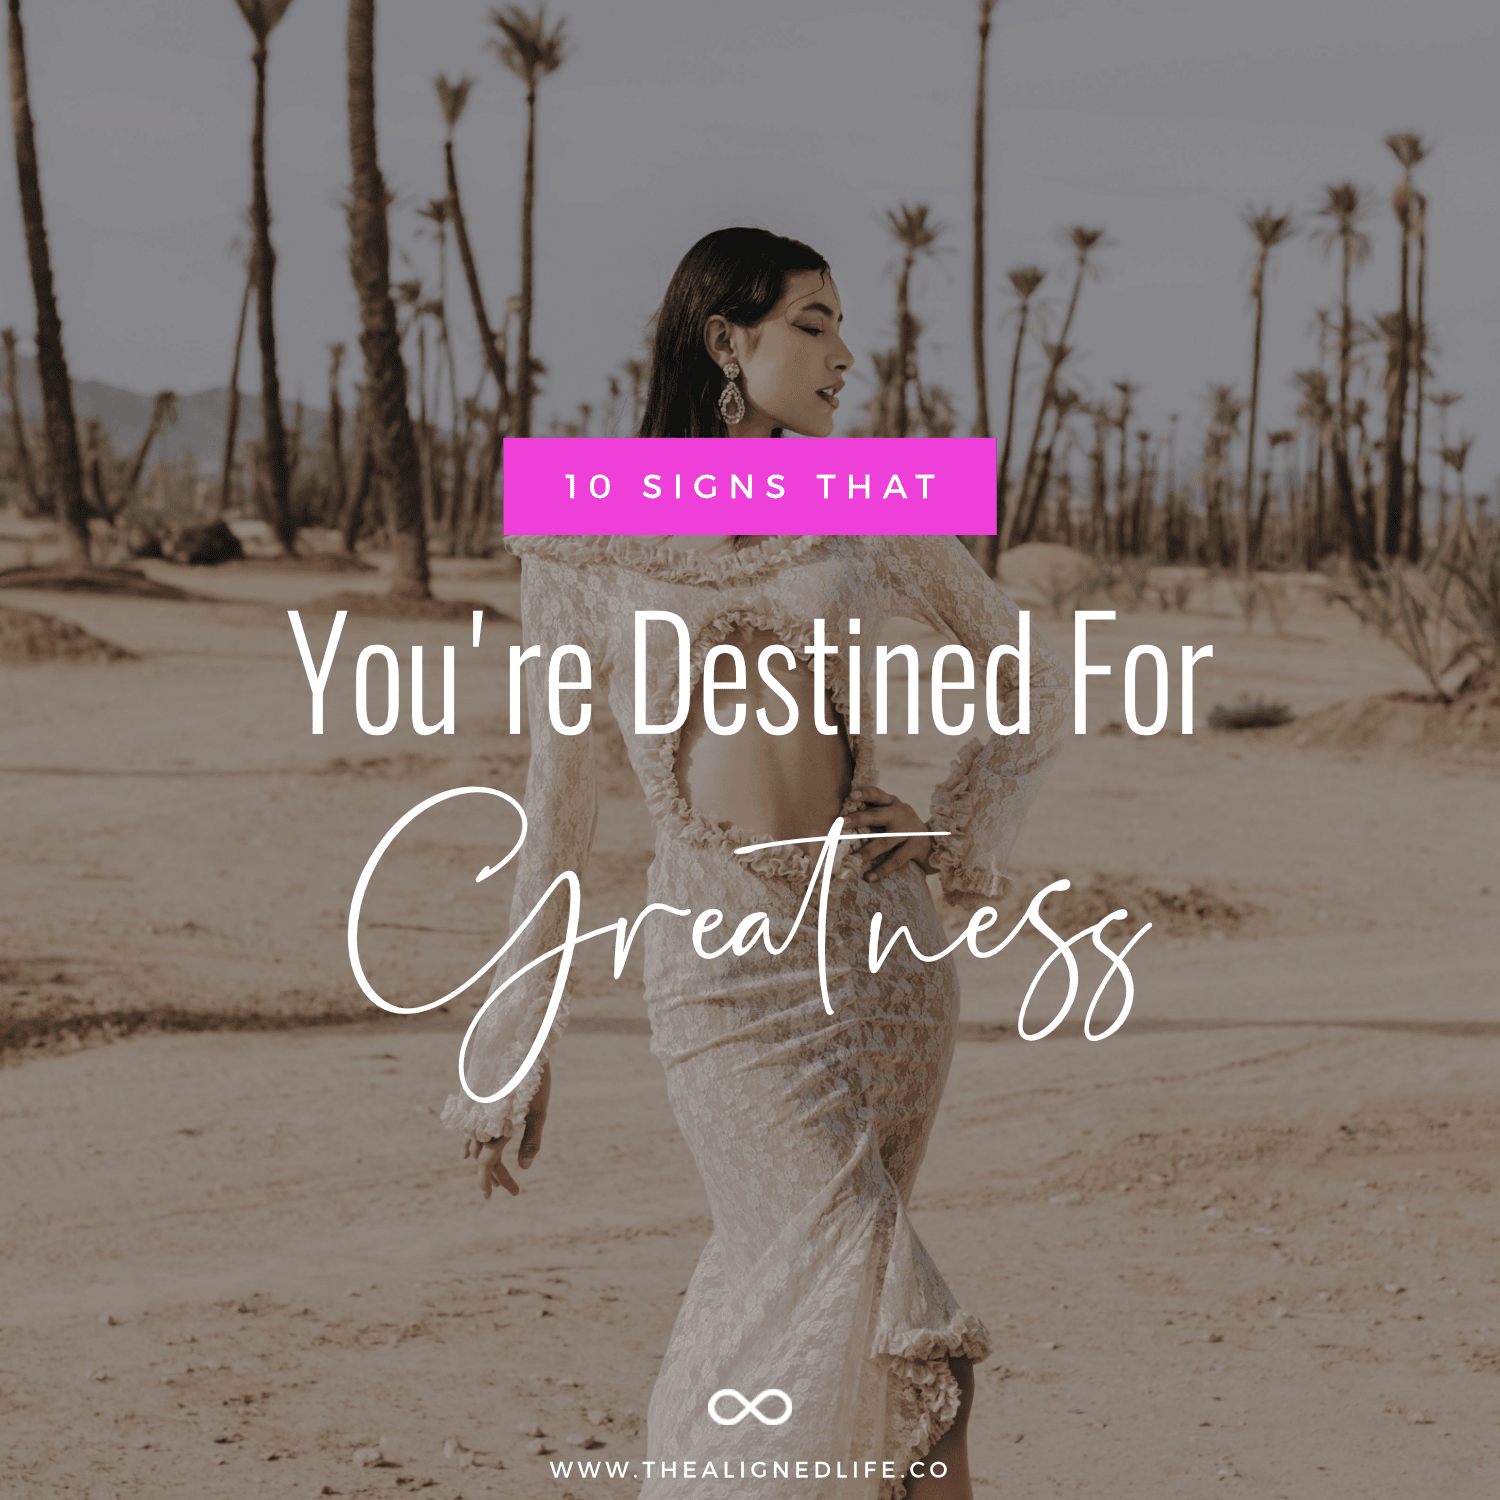 10 Signs That You're Destined For Greatness